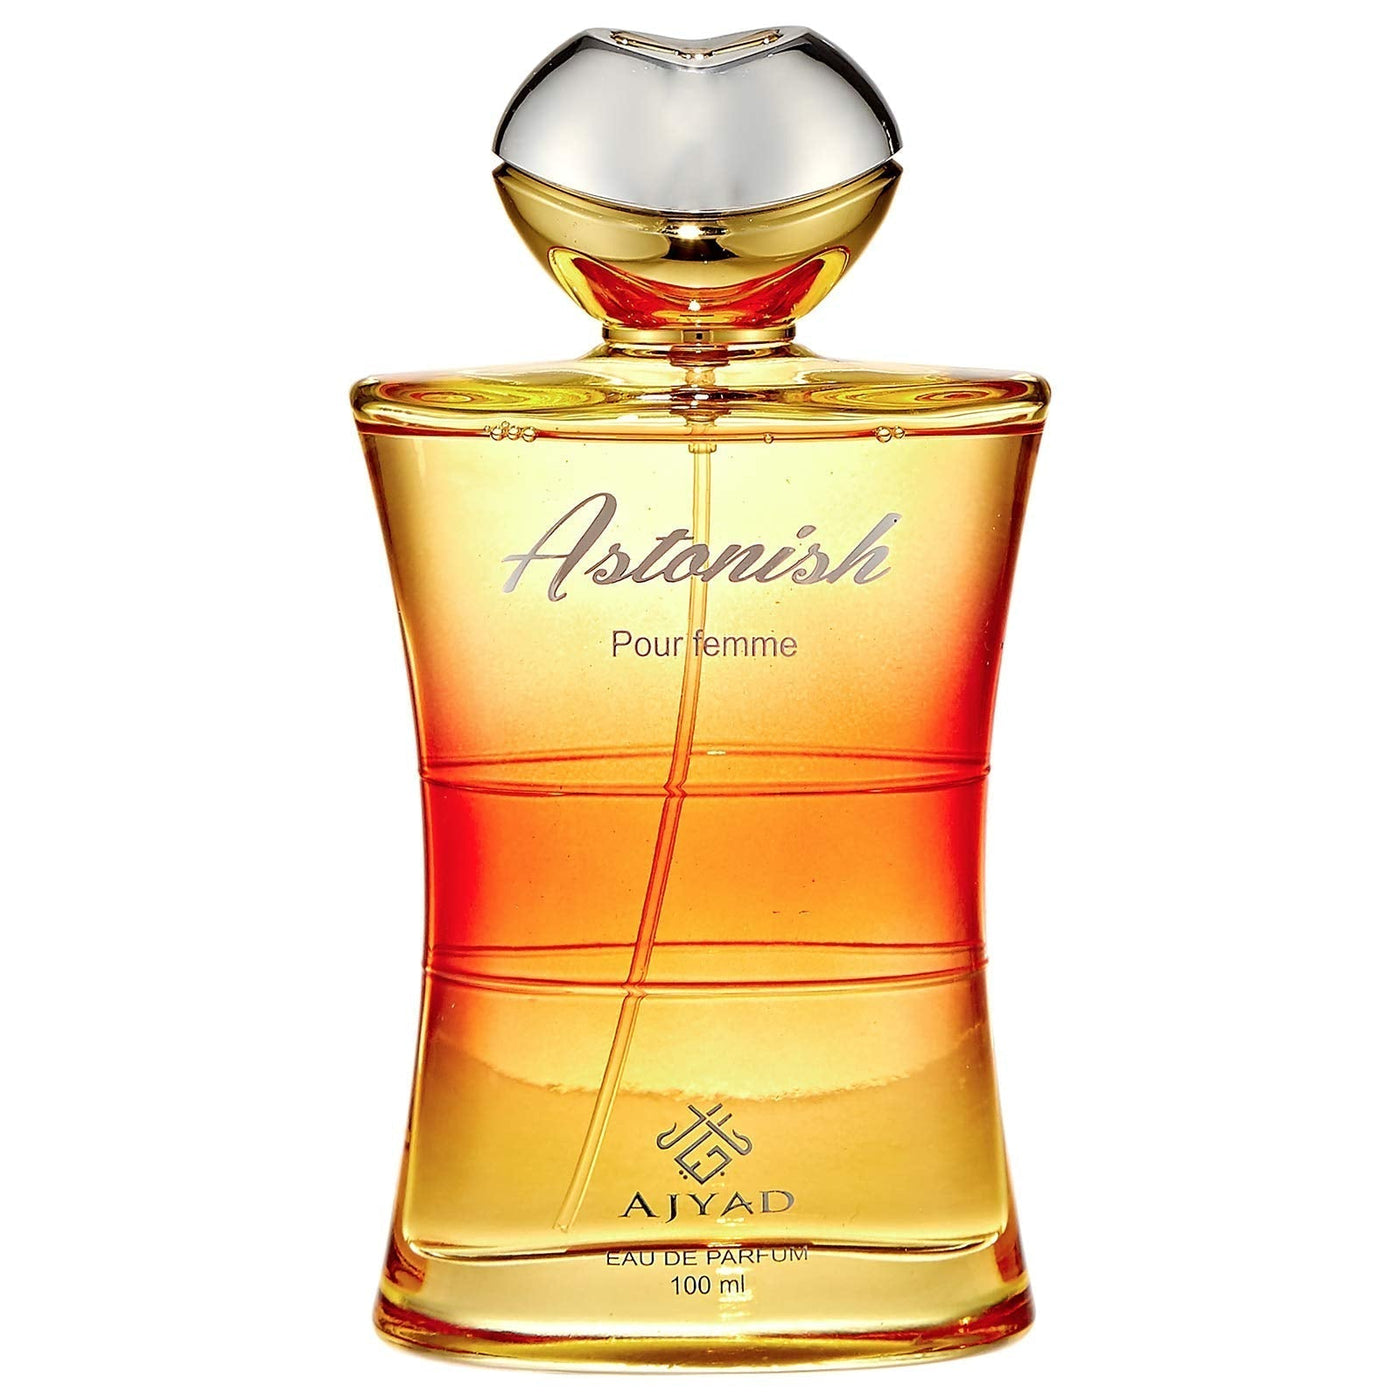 Astonish Pour Femme Perfume for Women 100ML EDP by Ajyad